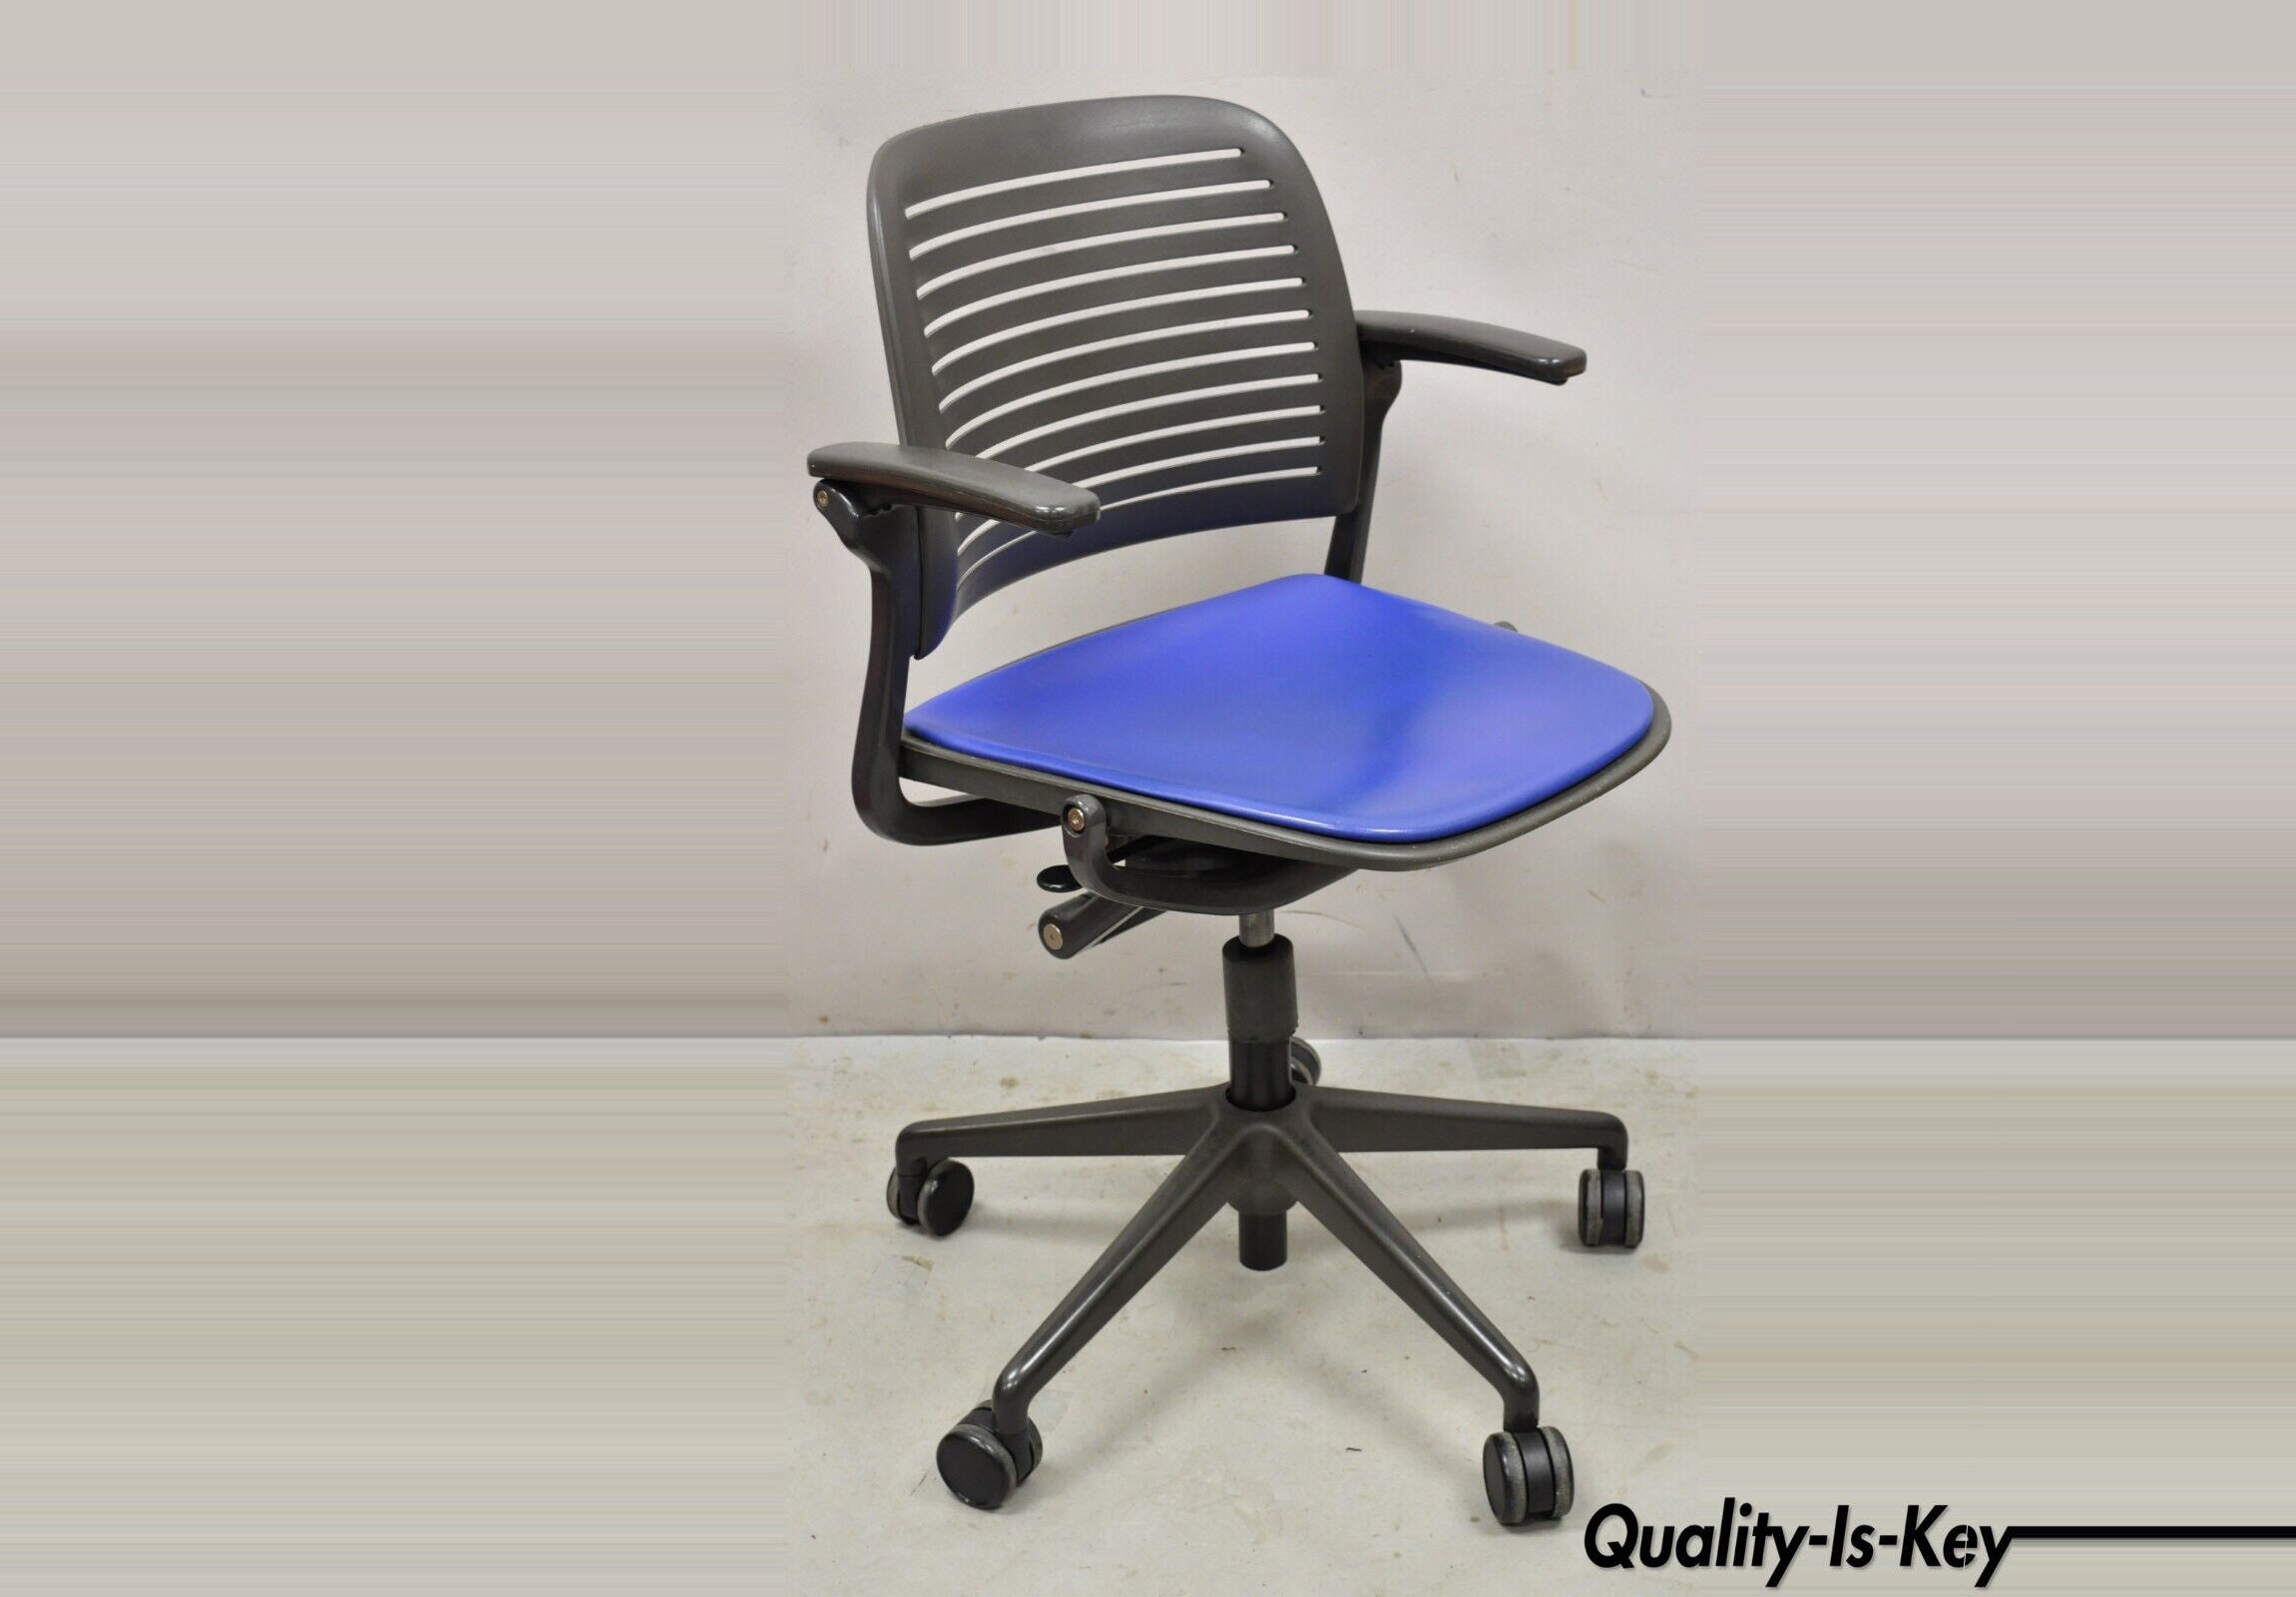 Steelcase 487 Cachet Swivel Office Desk Chair With Blue Seat - Etsy